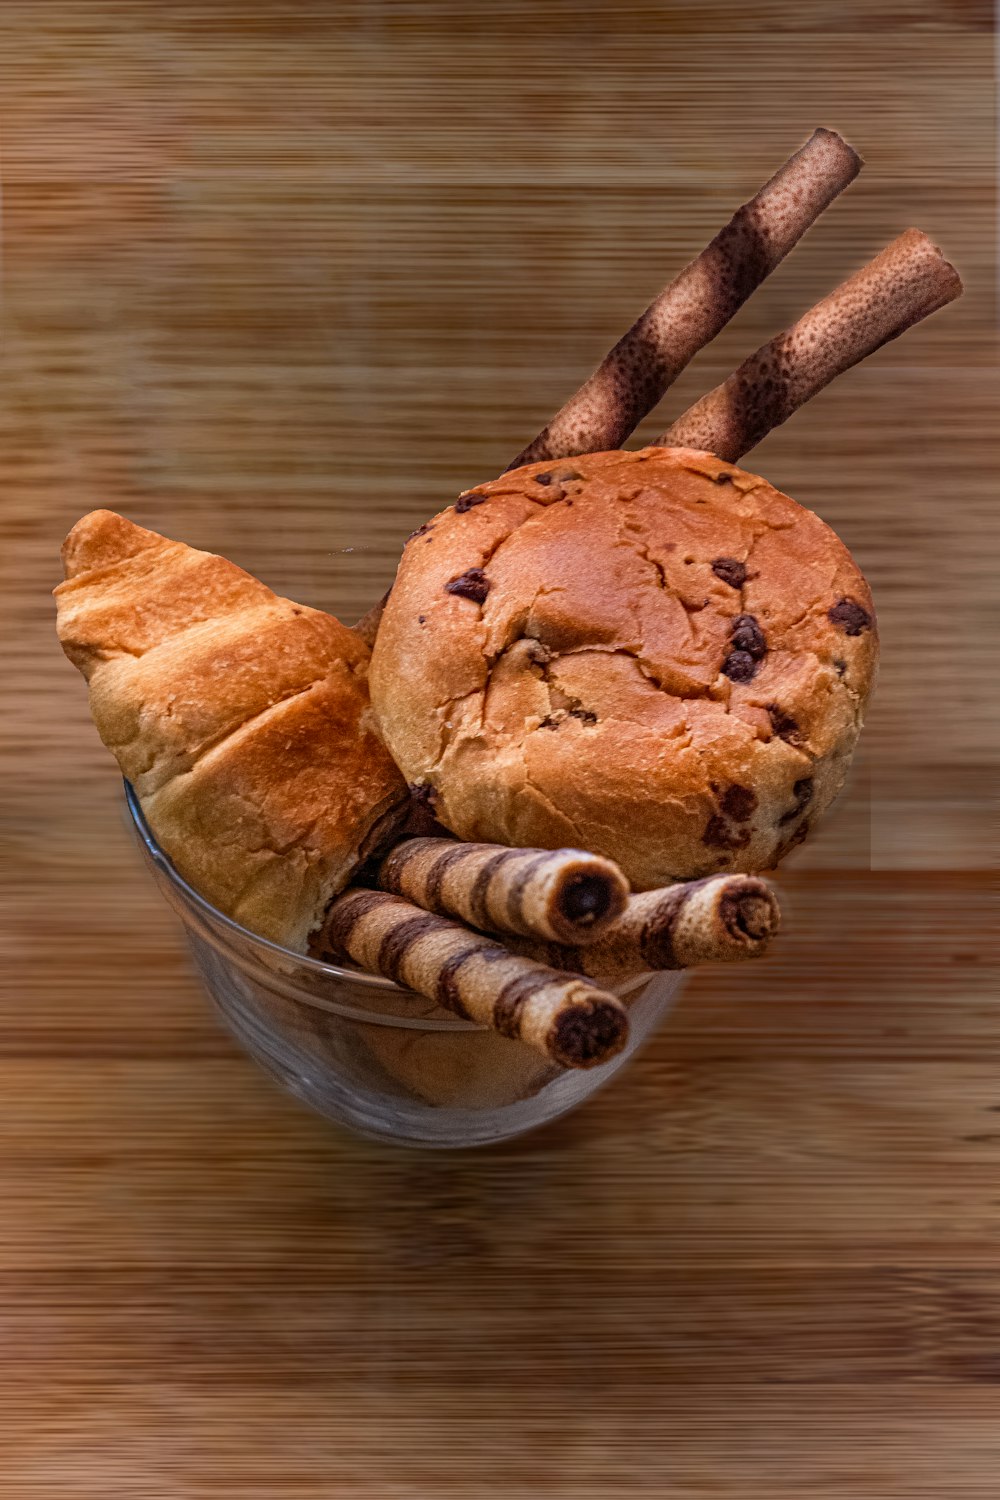 a loaf of bread sitting in a bowl with cinnamon sticks sticking out of it